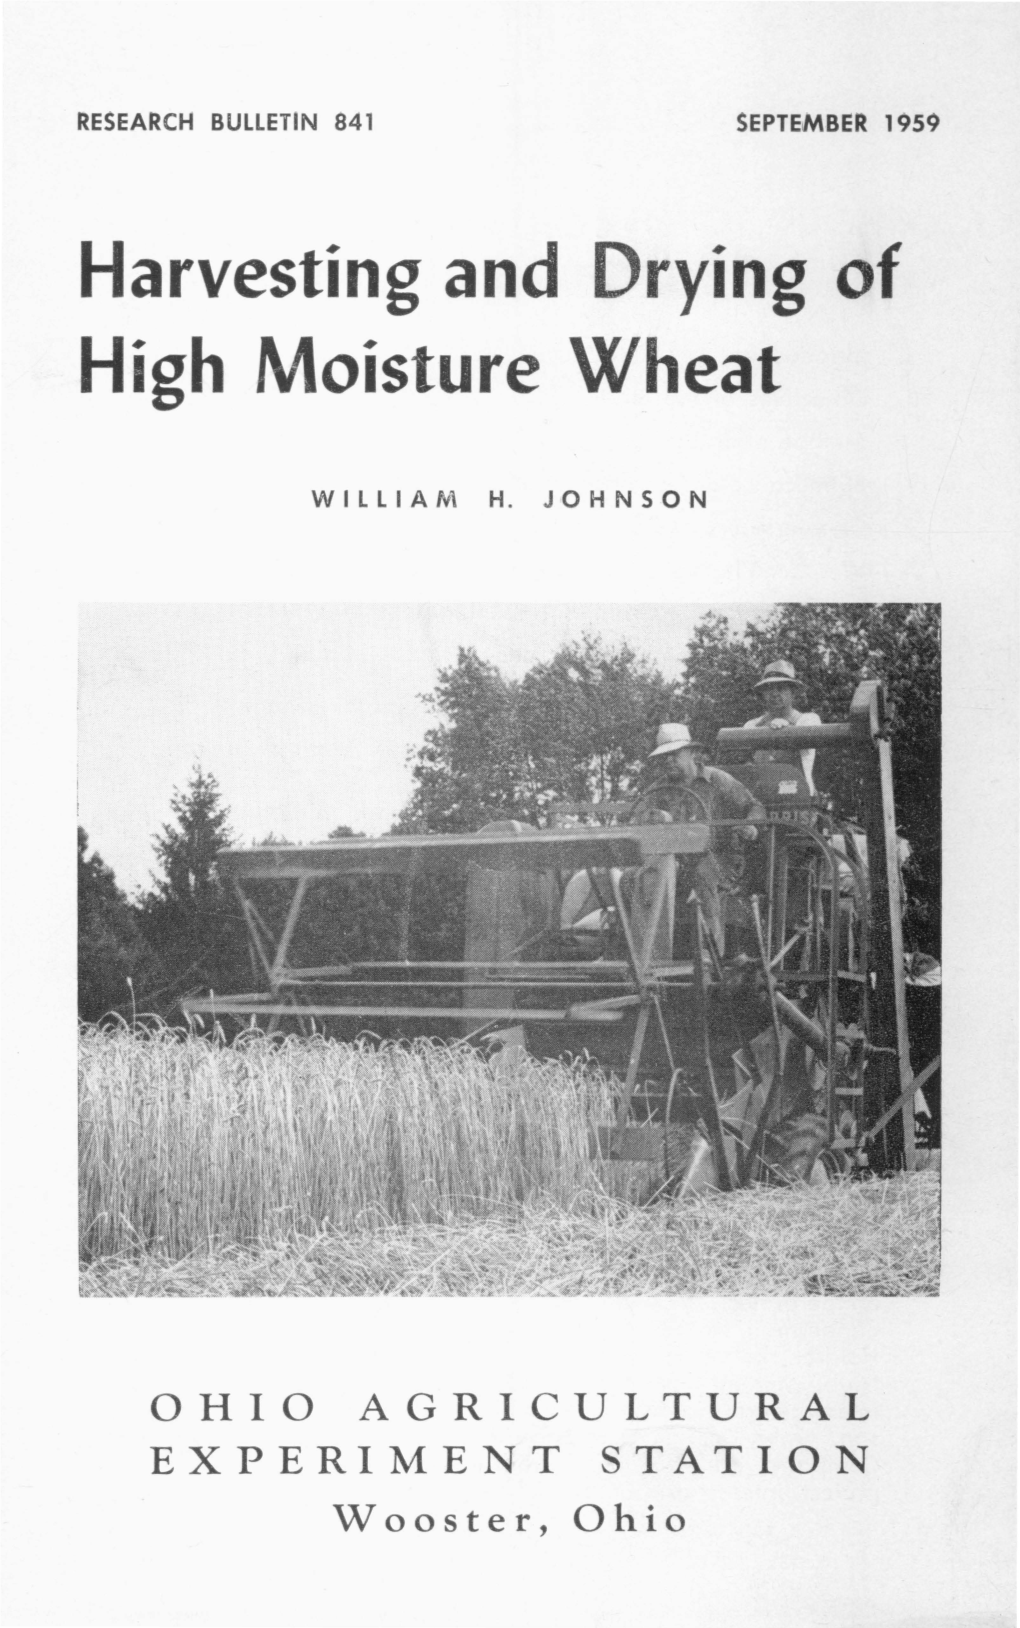 Harvesting and Drying of High Moisture Wheat